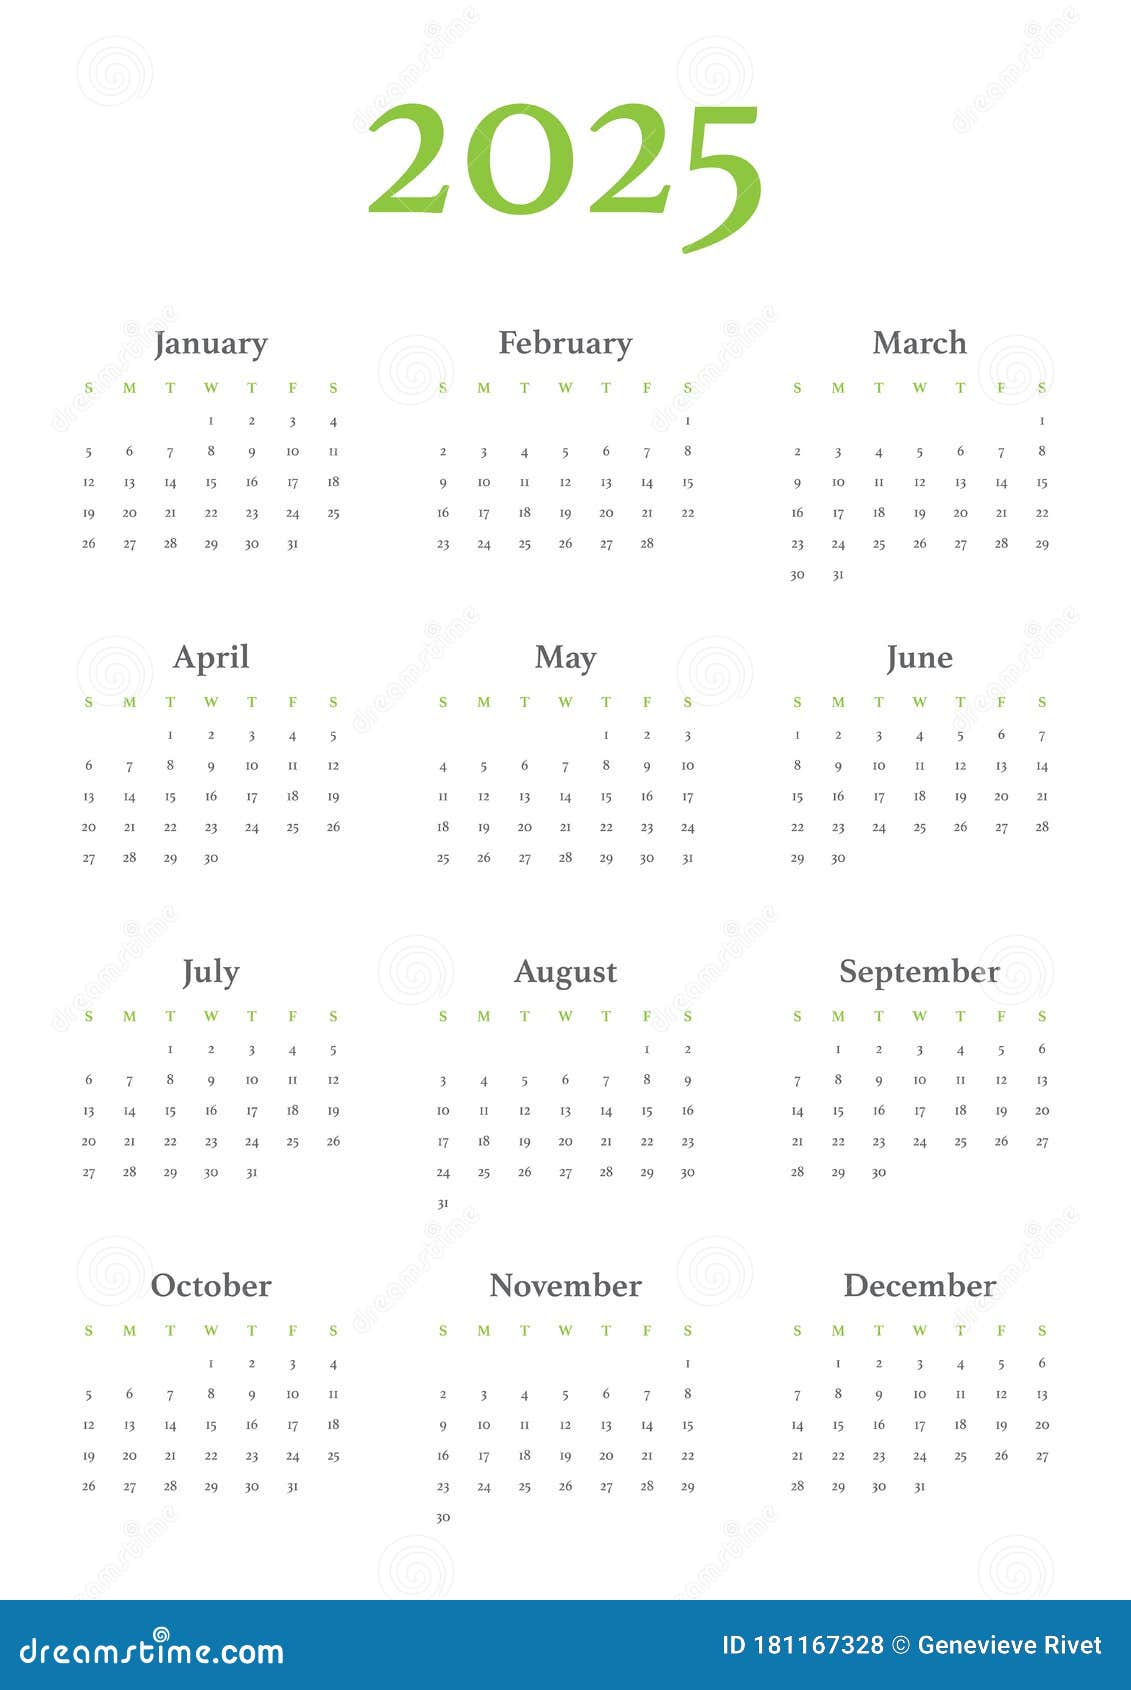 2026-united-states-calendar-with-holidays